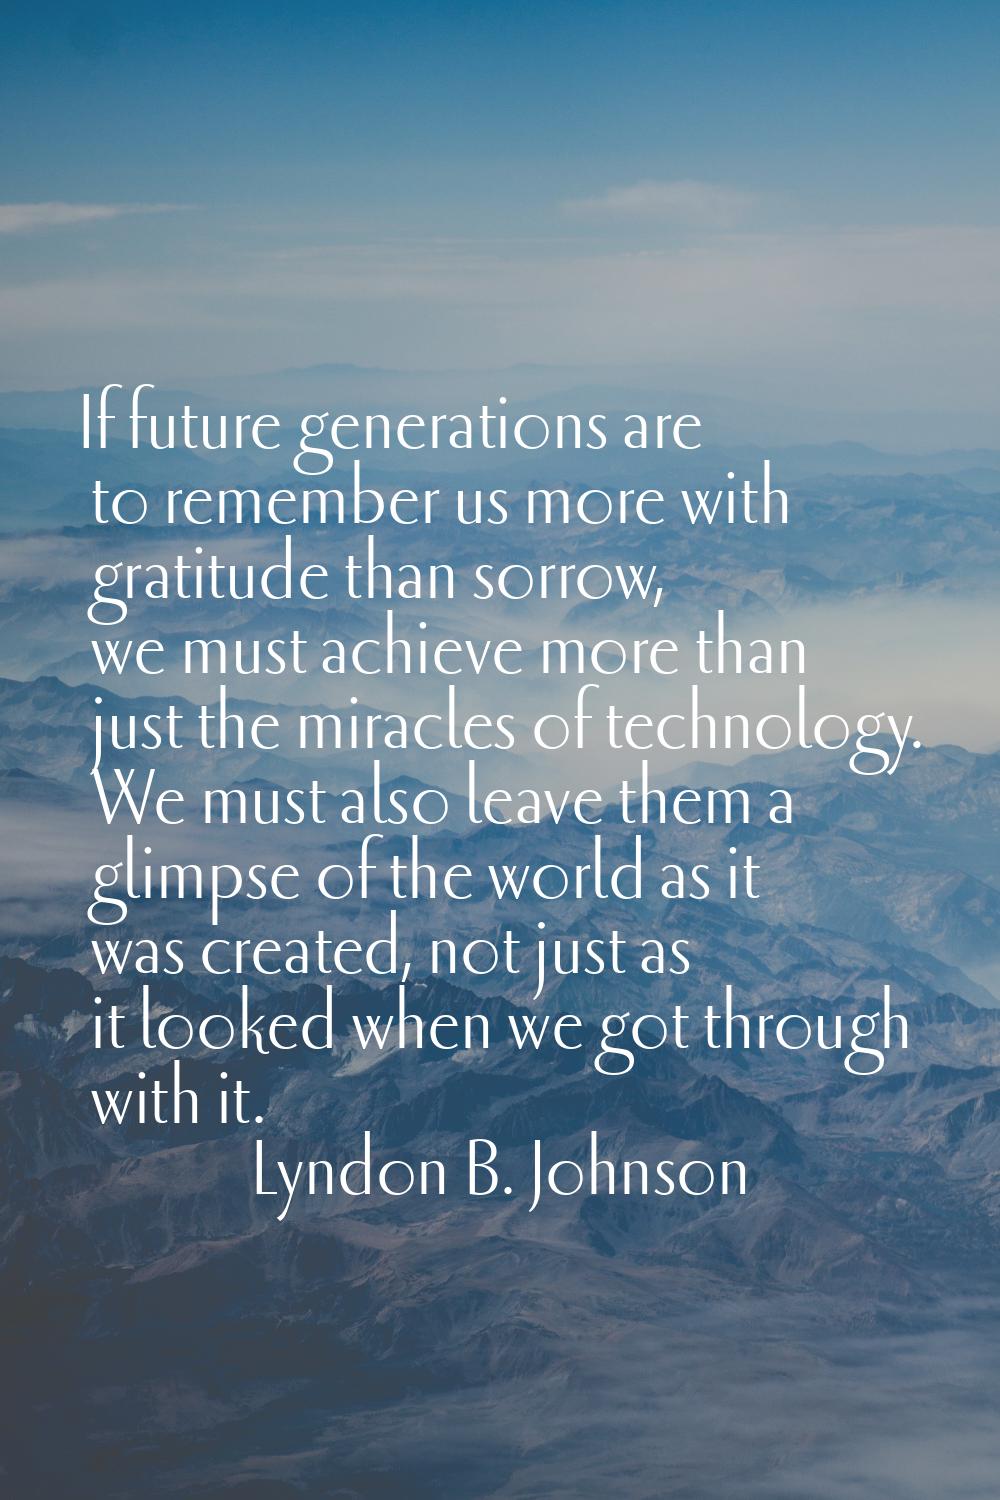 If future generations are to remember us more with gratitude than sorrow, we must achieve more than